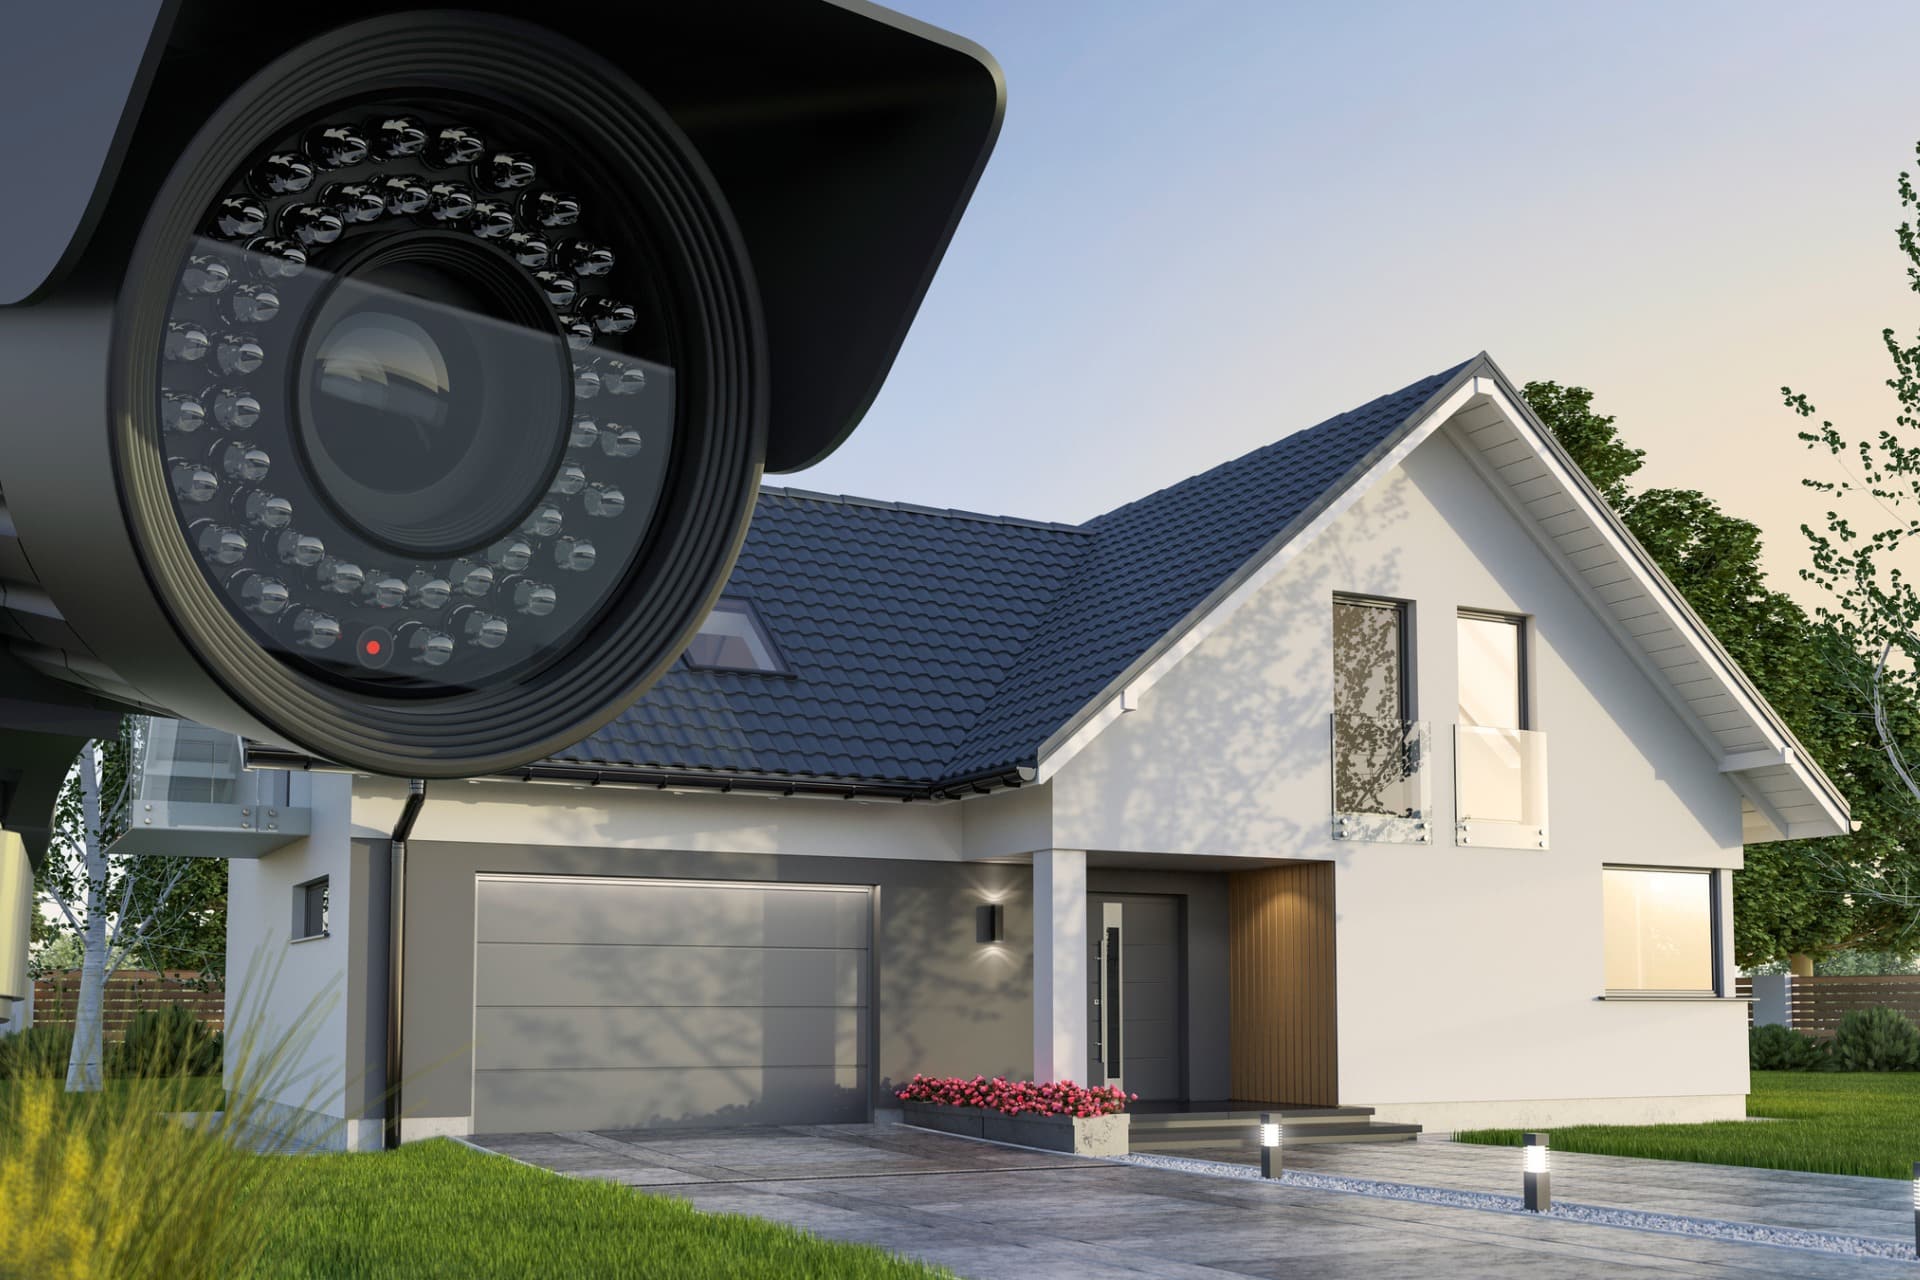 A residential security camera